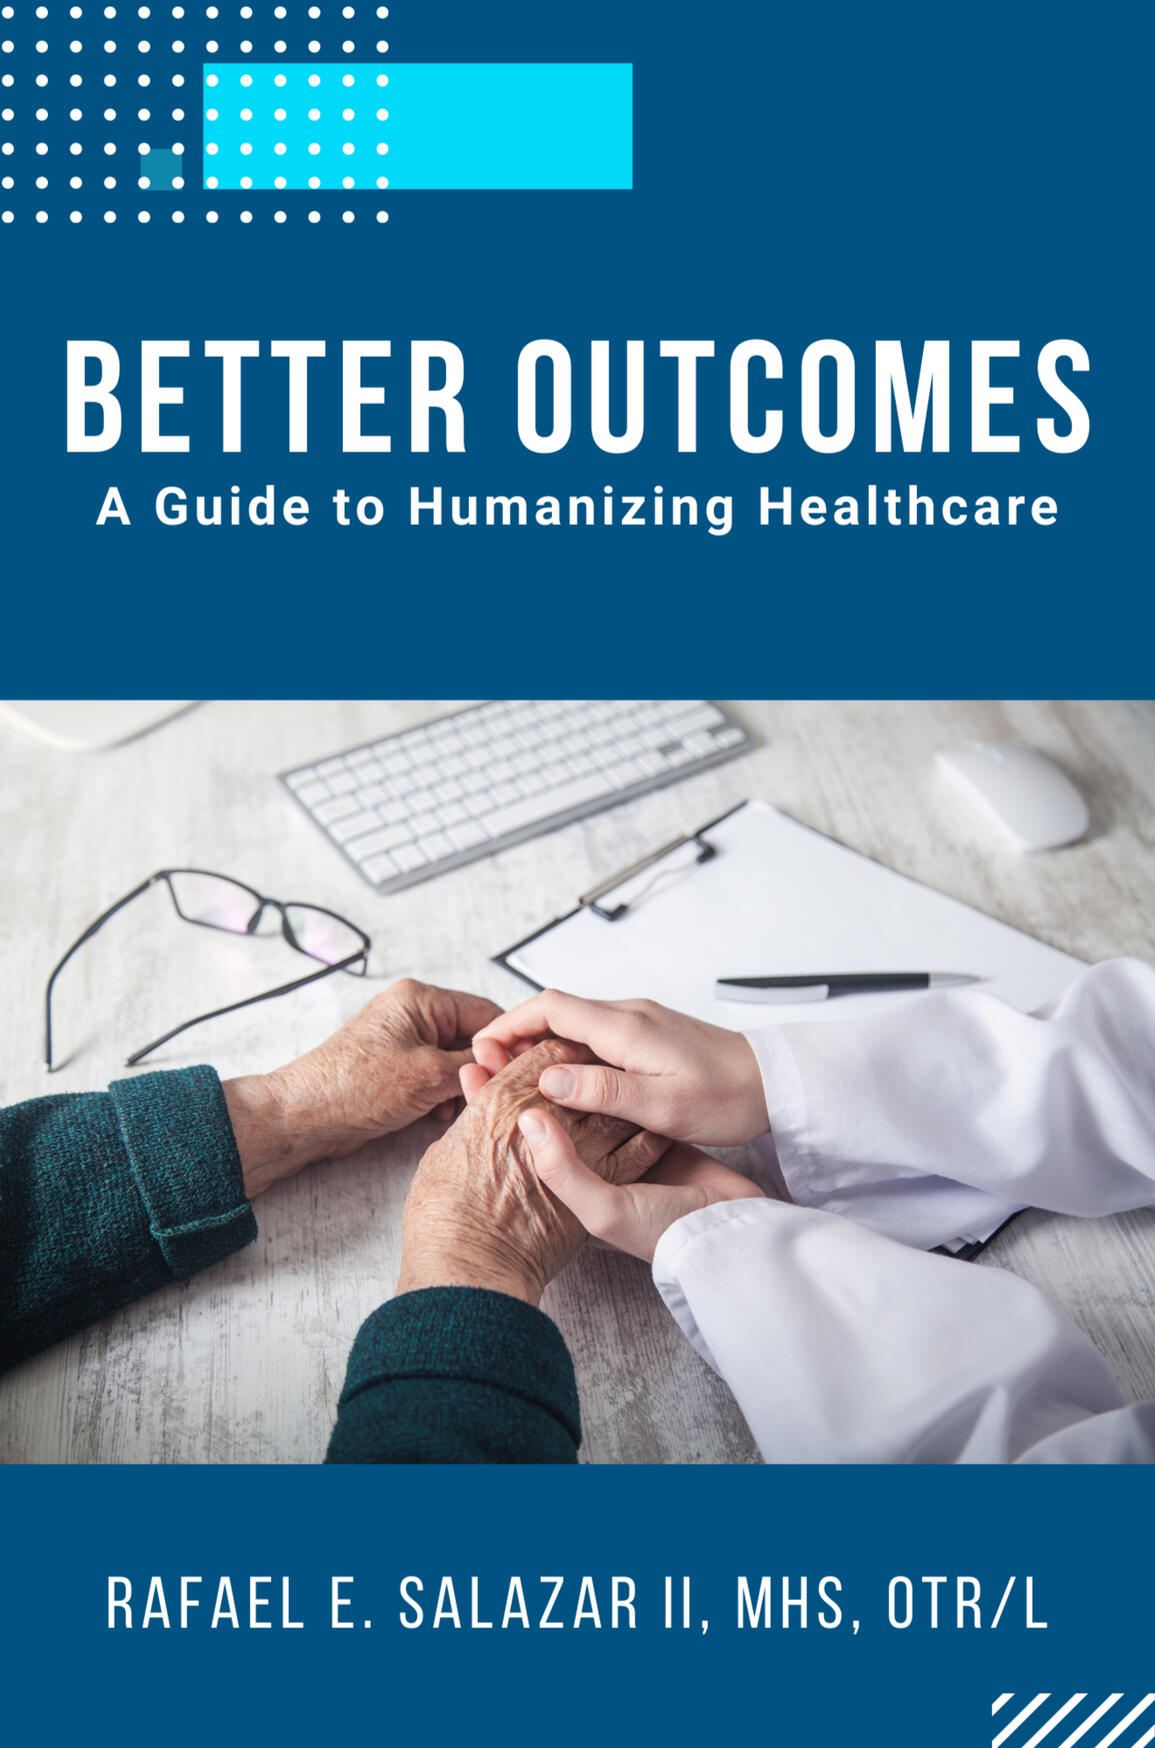 The Better Outcomes Show Book